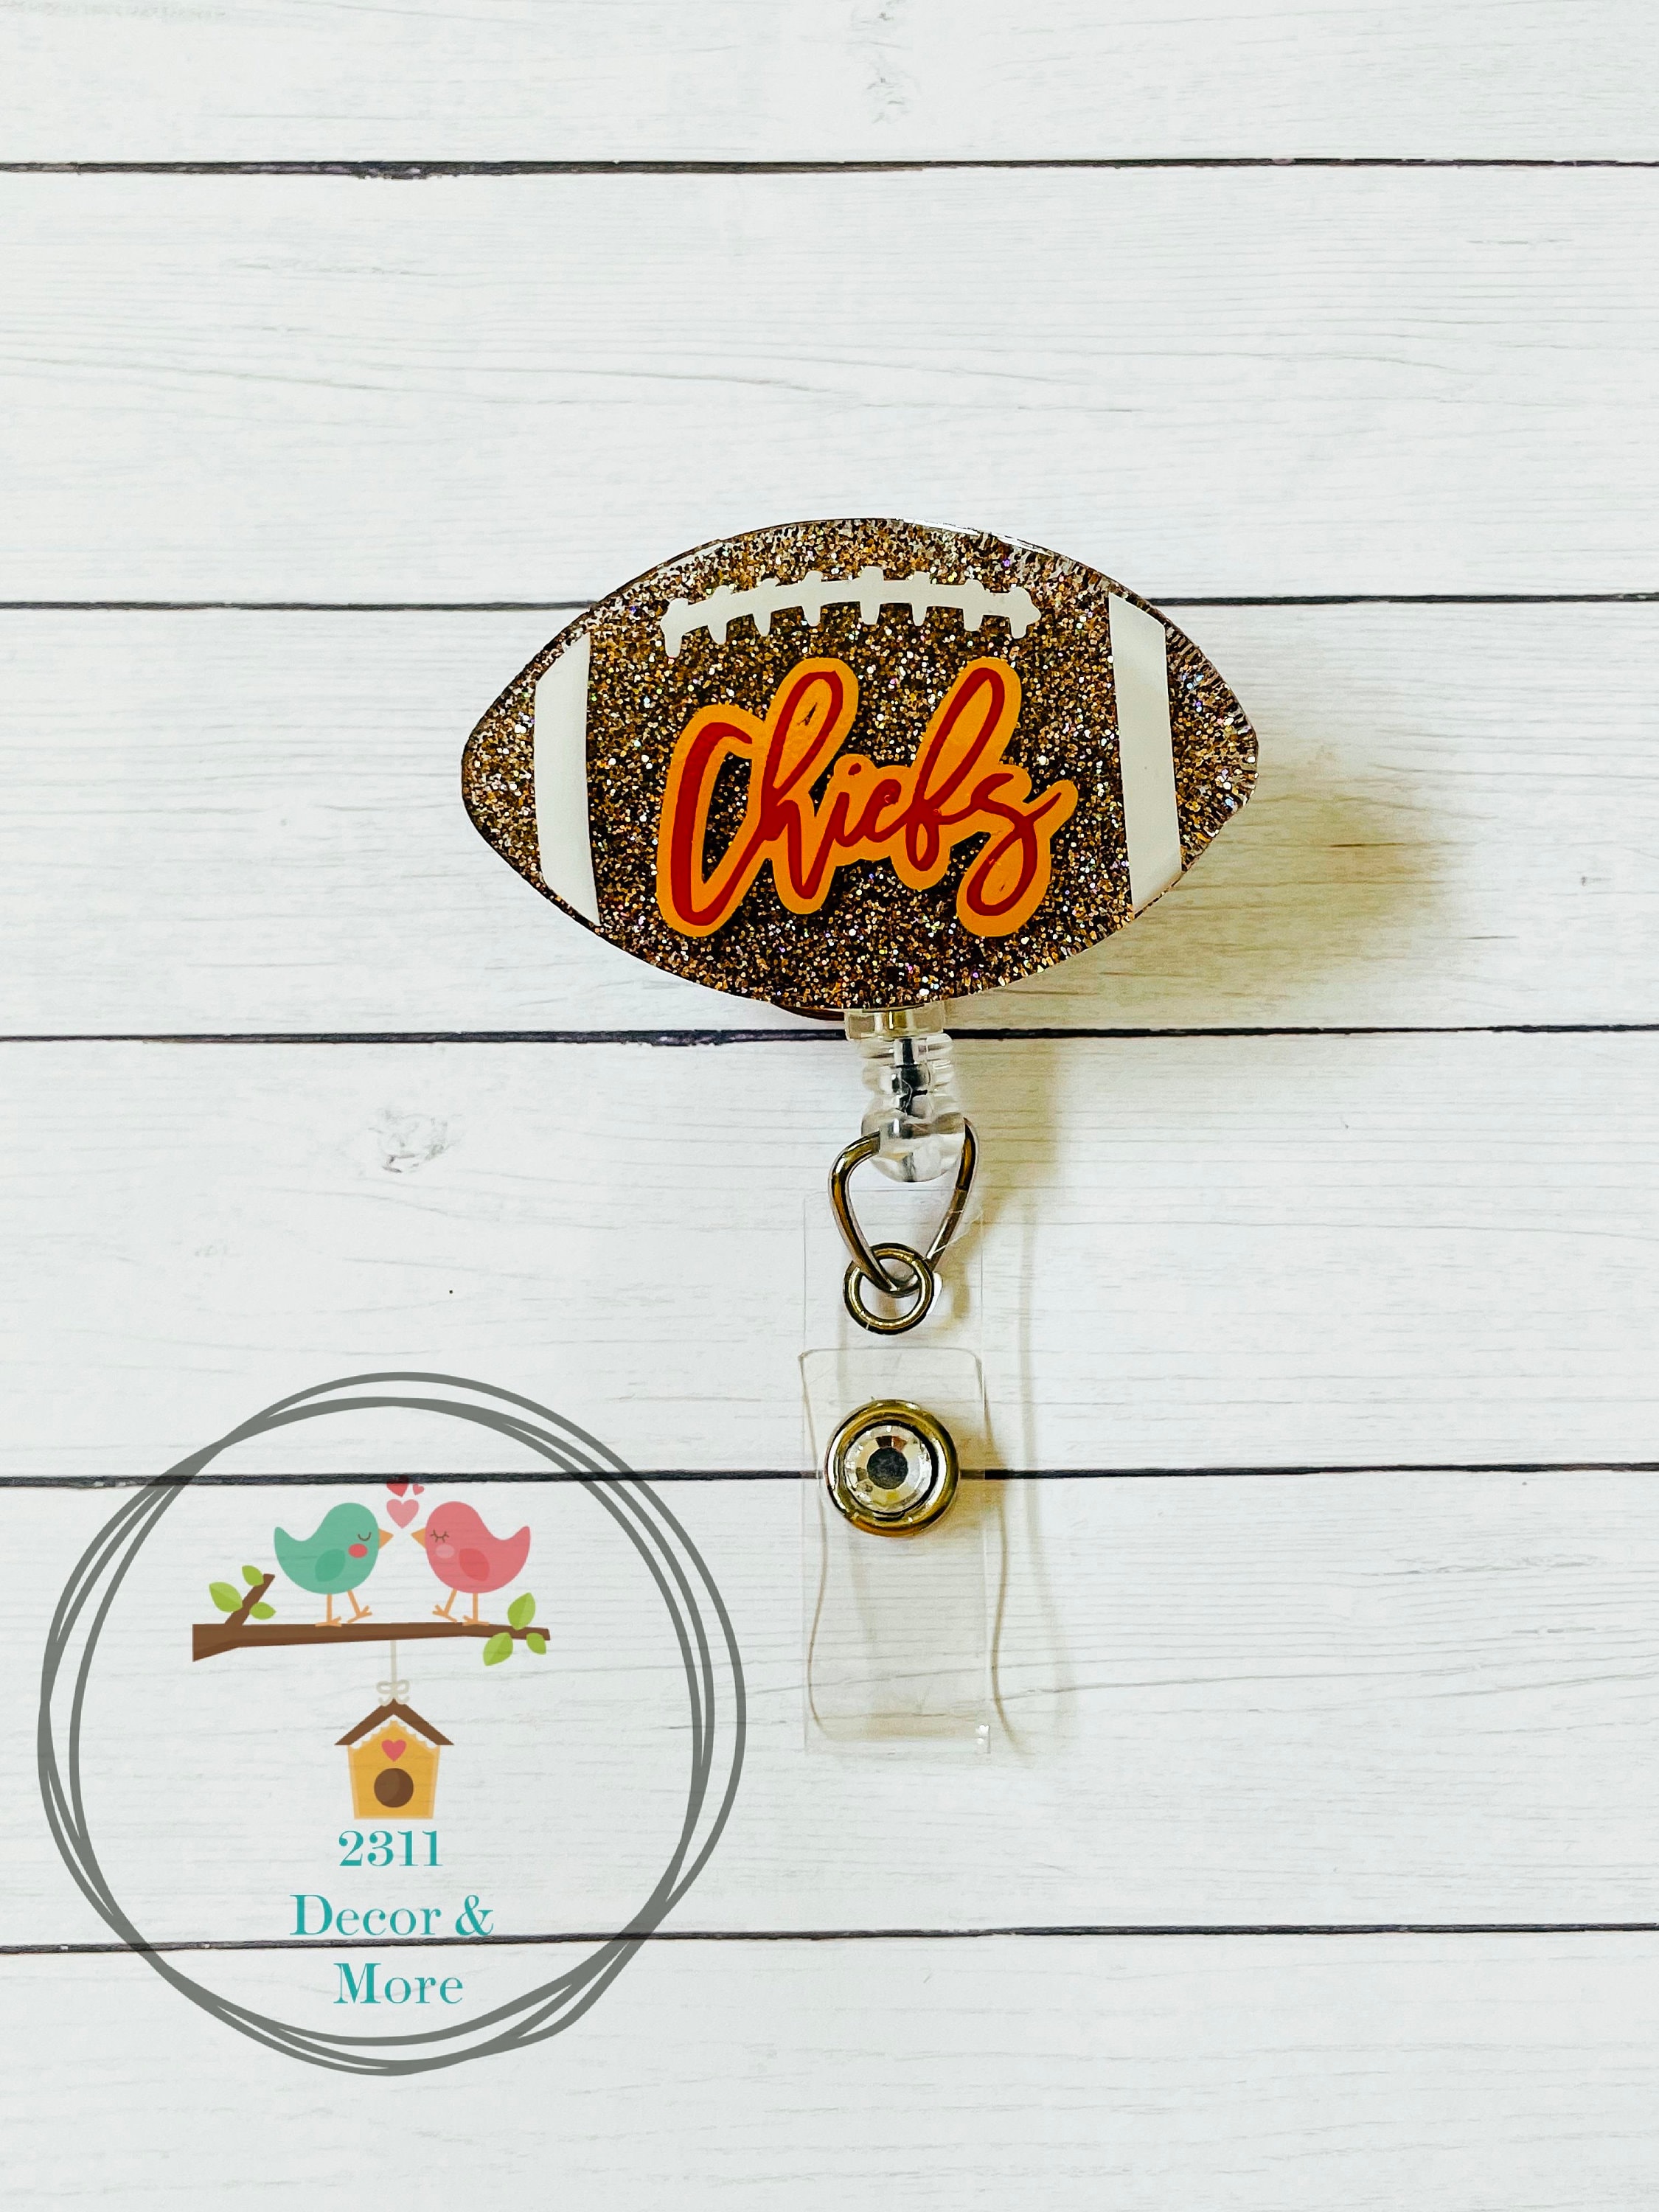 KC Chiefs Key Fob, Kansas City, Key Fobs, Lanyards for Keys, Football  Lovers, Gifts for Him, Gifts for Her, Super Bowl Champions, Mahomes 